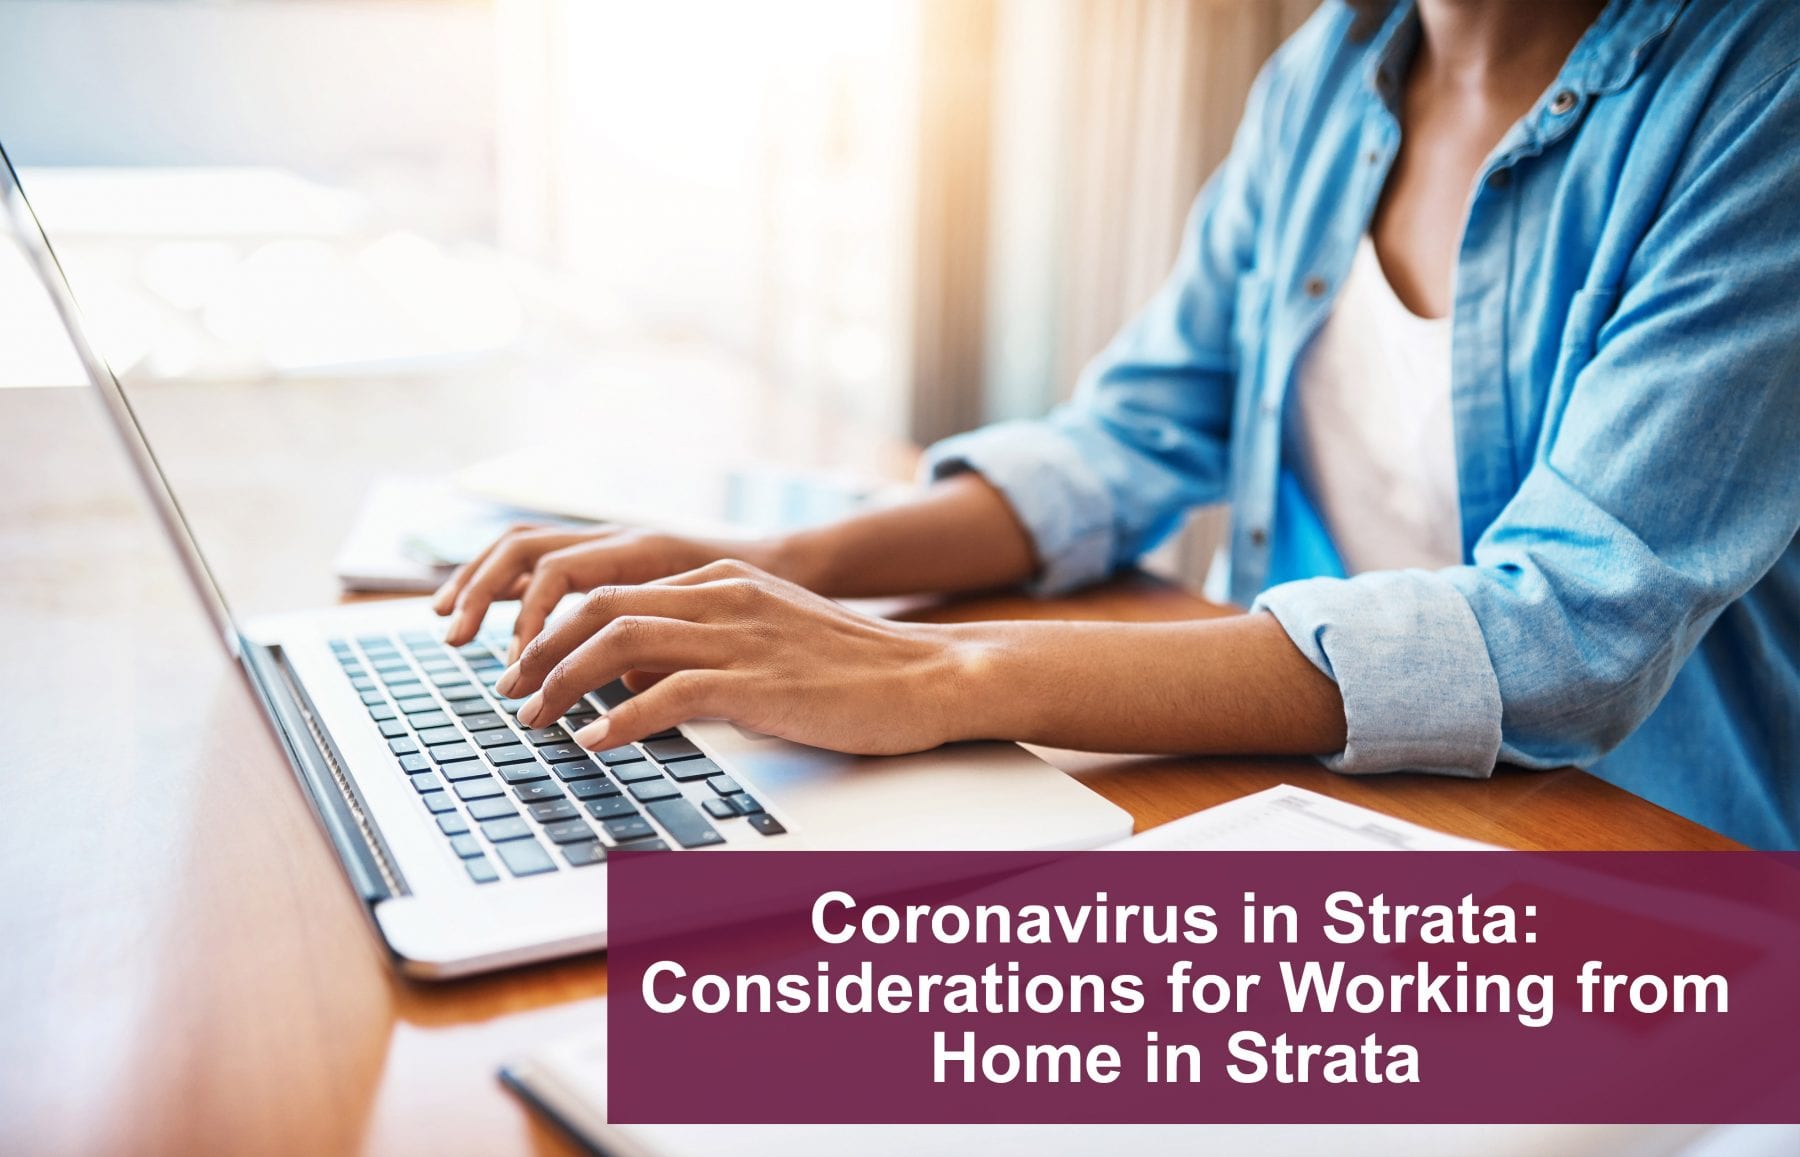 Working from Home in Strata